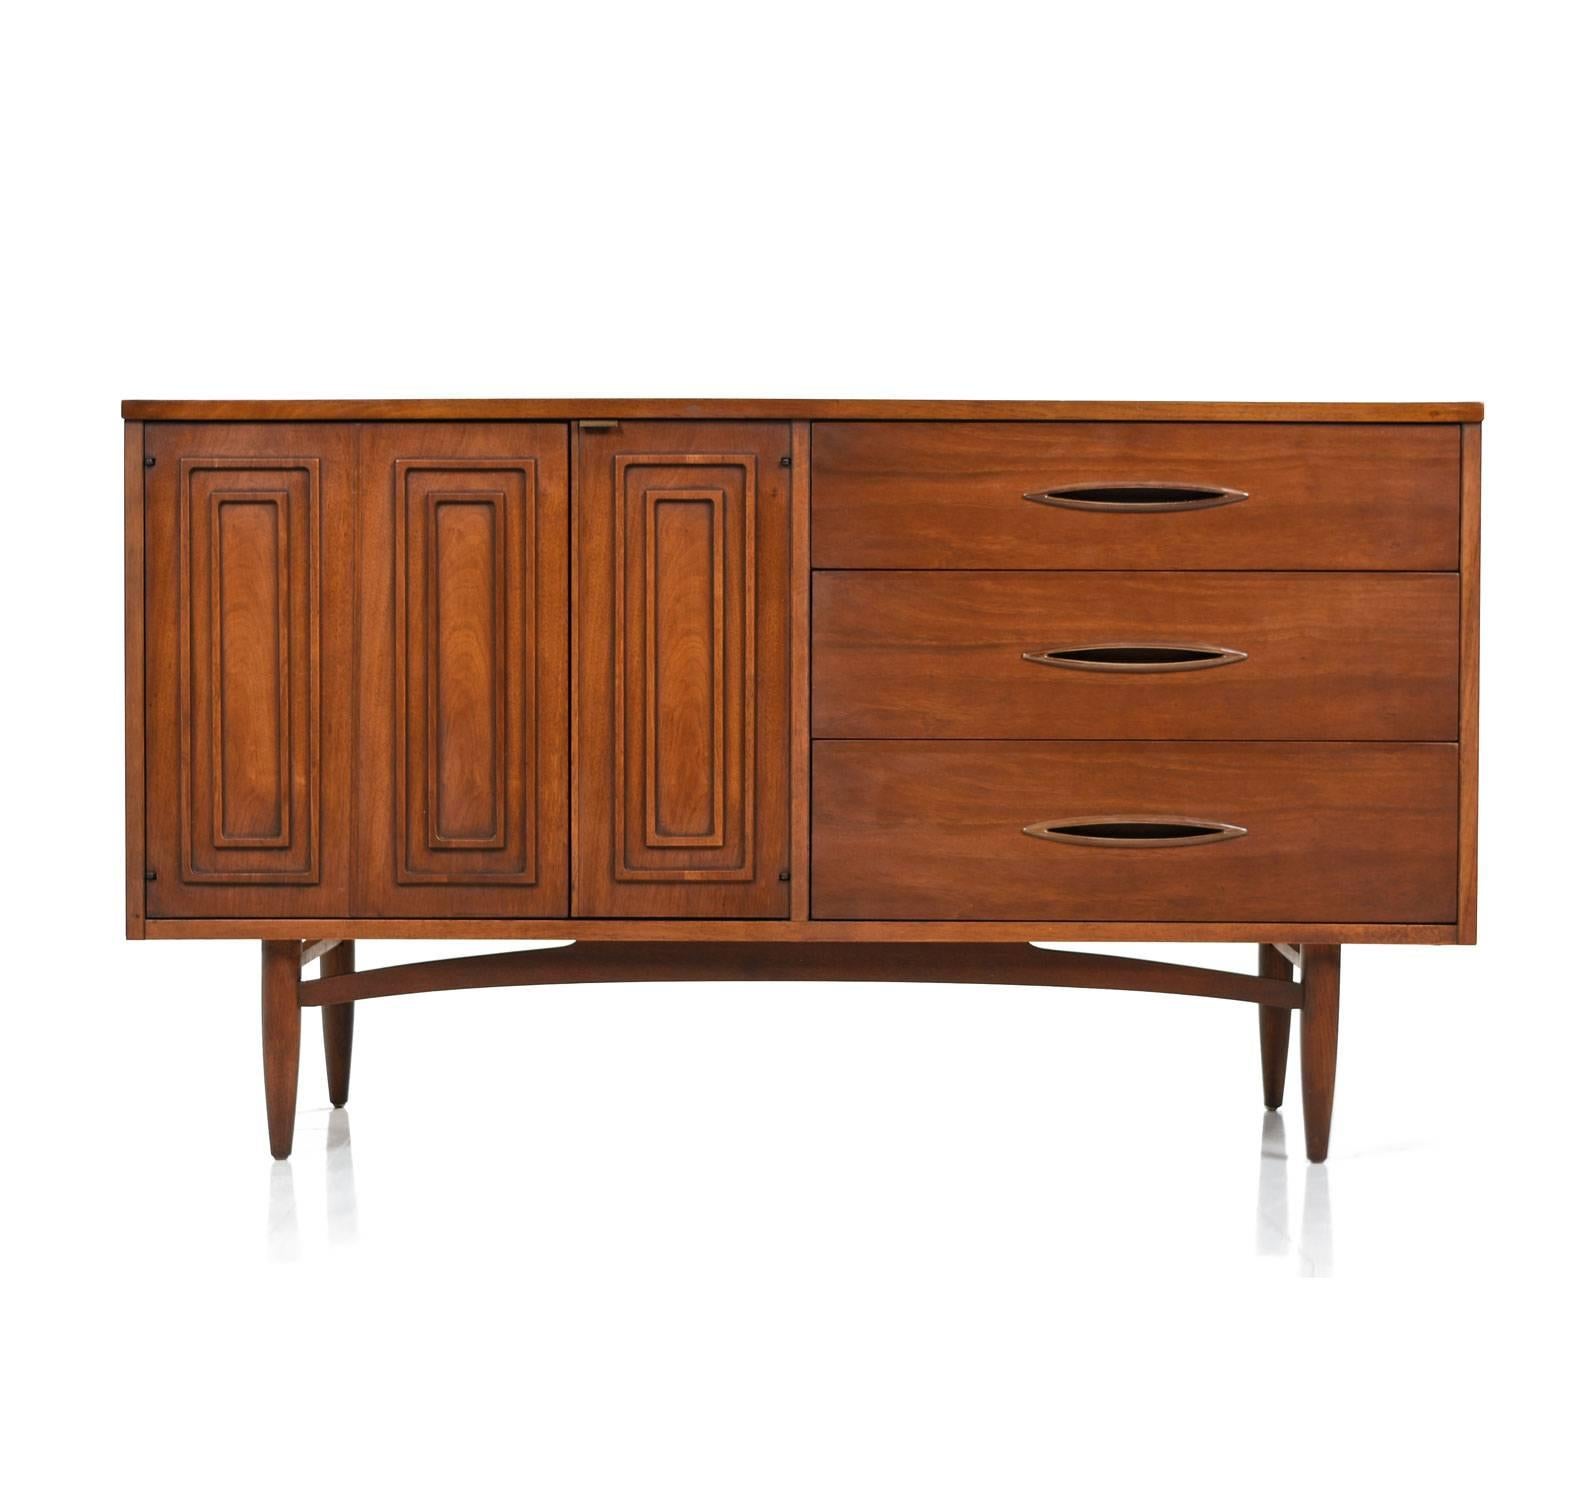 Mid-Century Modern sculptra credenza by Broyhill. Signature relief cut pattern adorns the cabinet doors. Inset elliptical handles on the drawers enhance the atomic age charm. Left side features a cabinet space. Additional storage to the right with